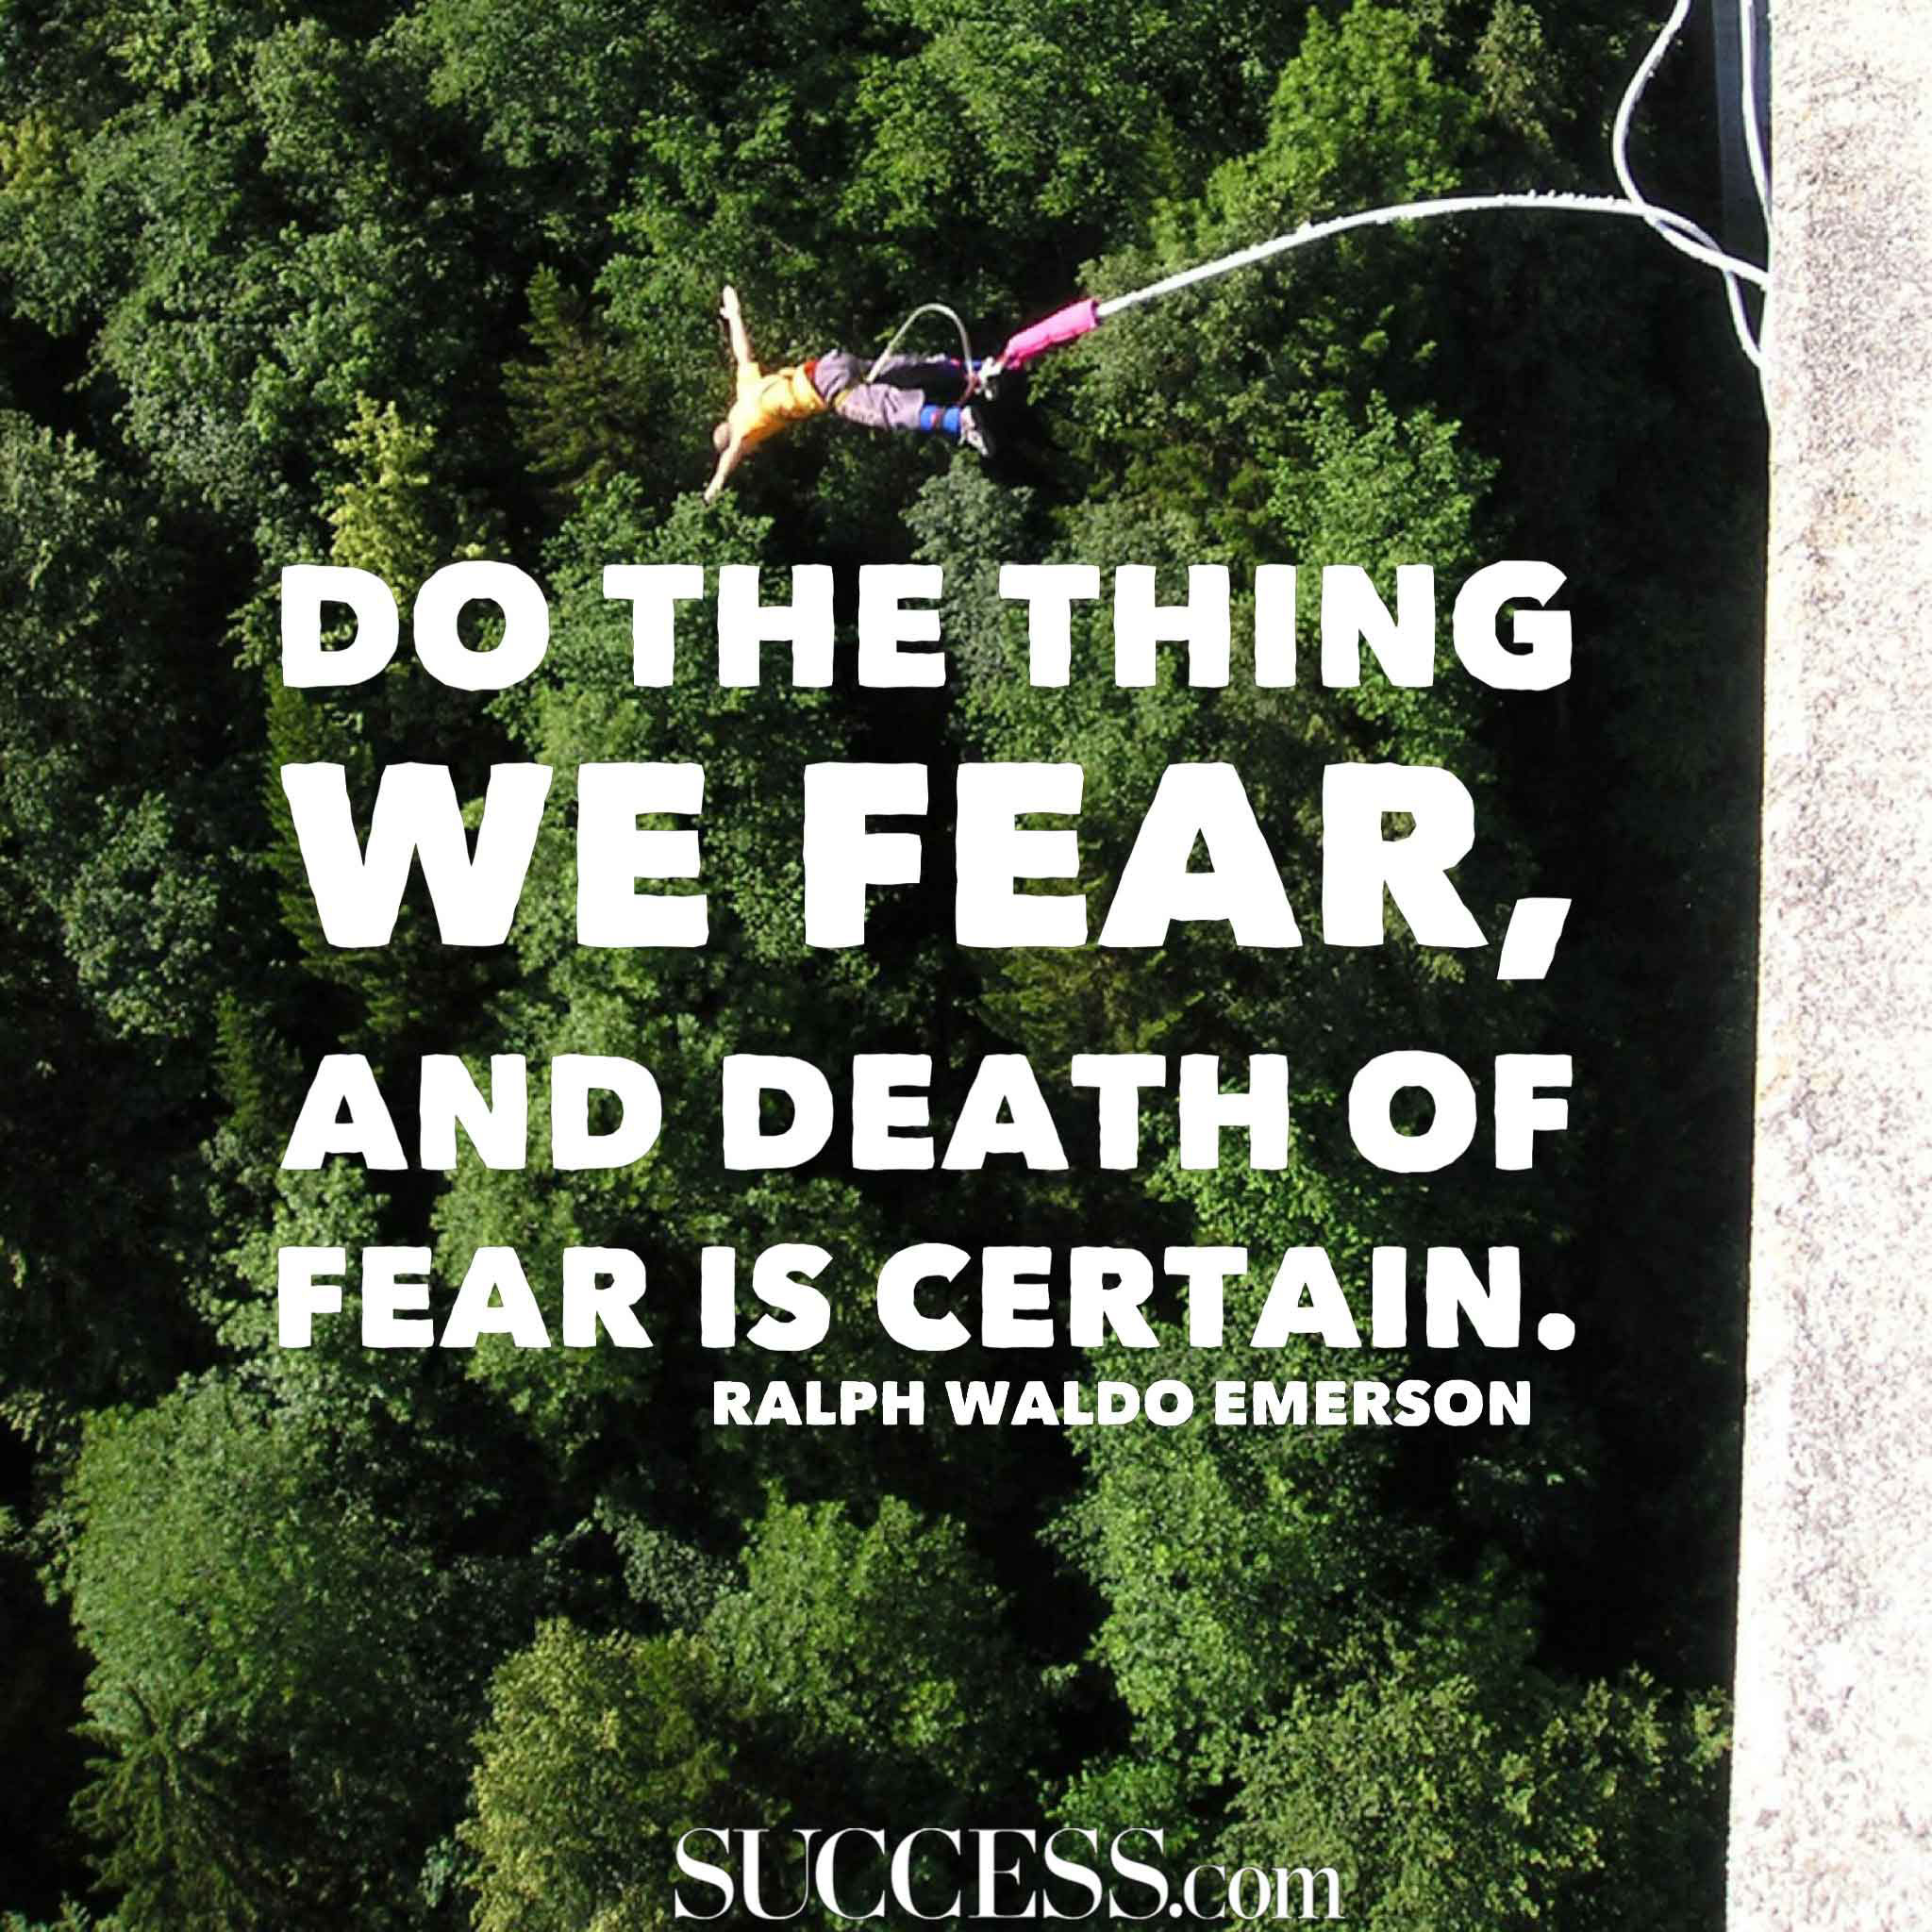 19 Quotes About Facing Your Fears